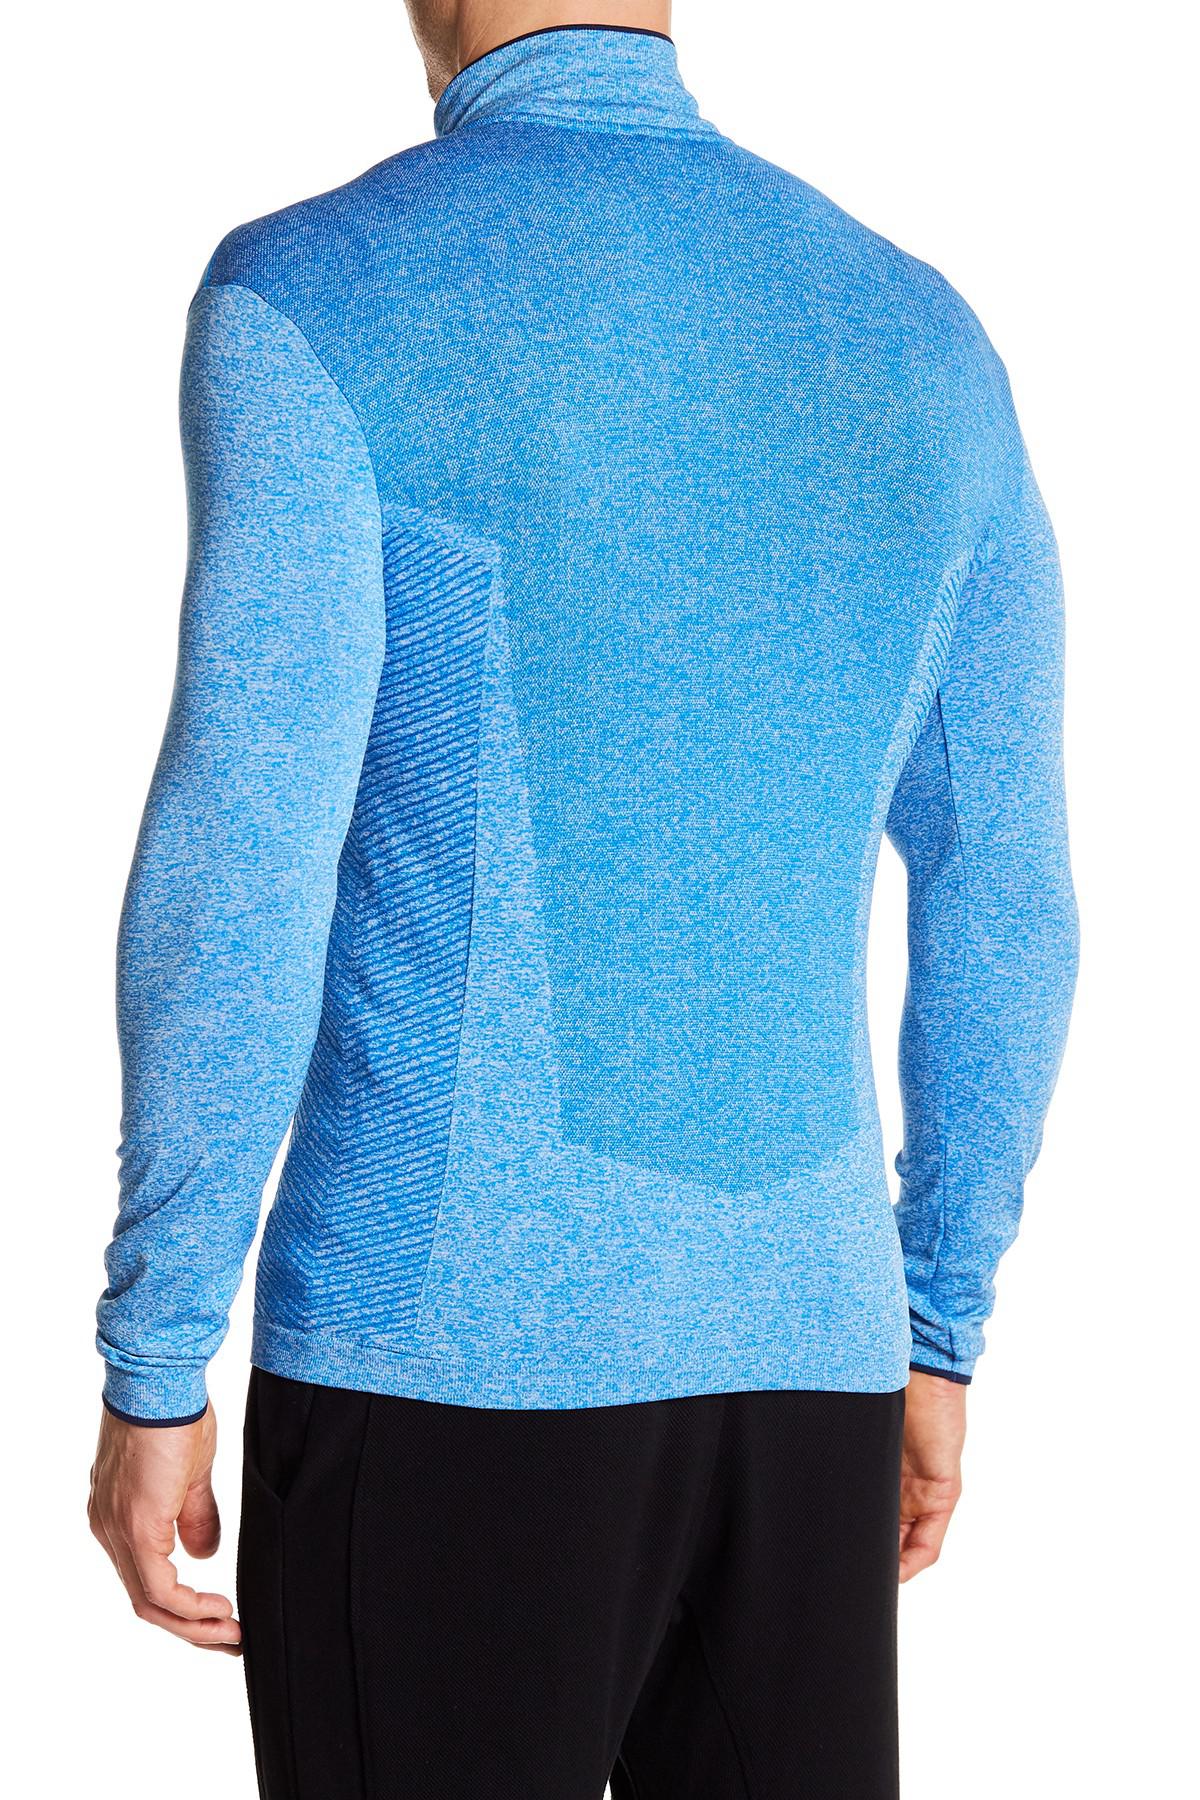 Nike Synthetic Golf Knit Pullover in Blue for Men - Lyst